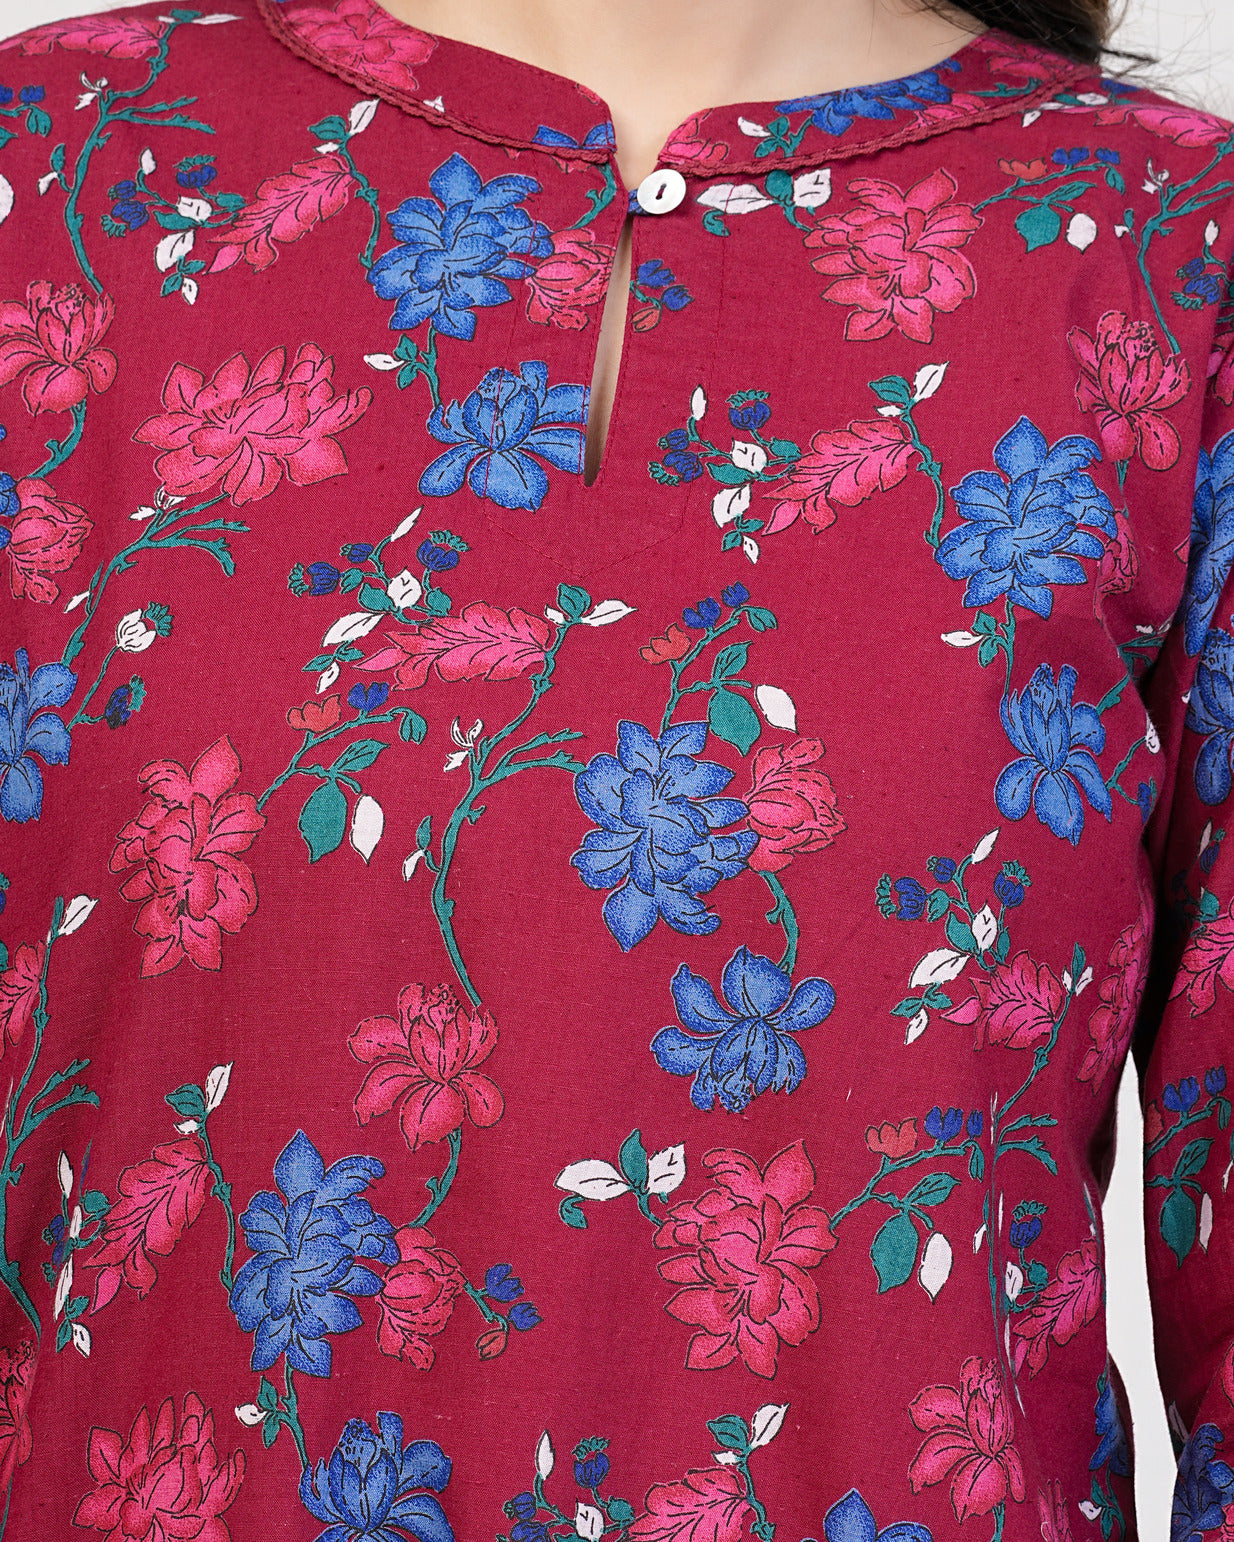 Beetroot Color With Floral Print Cotton Kurti